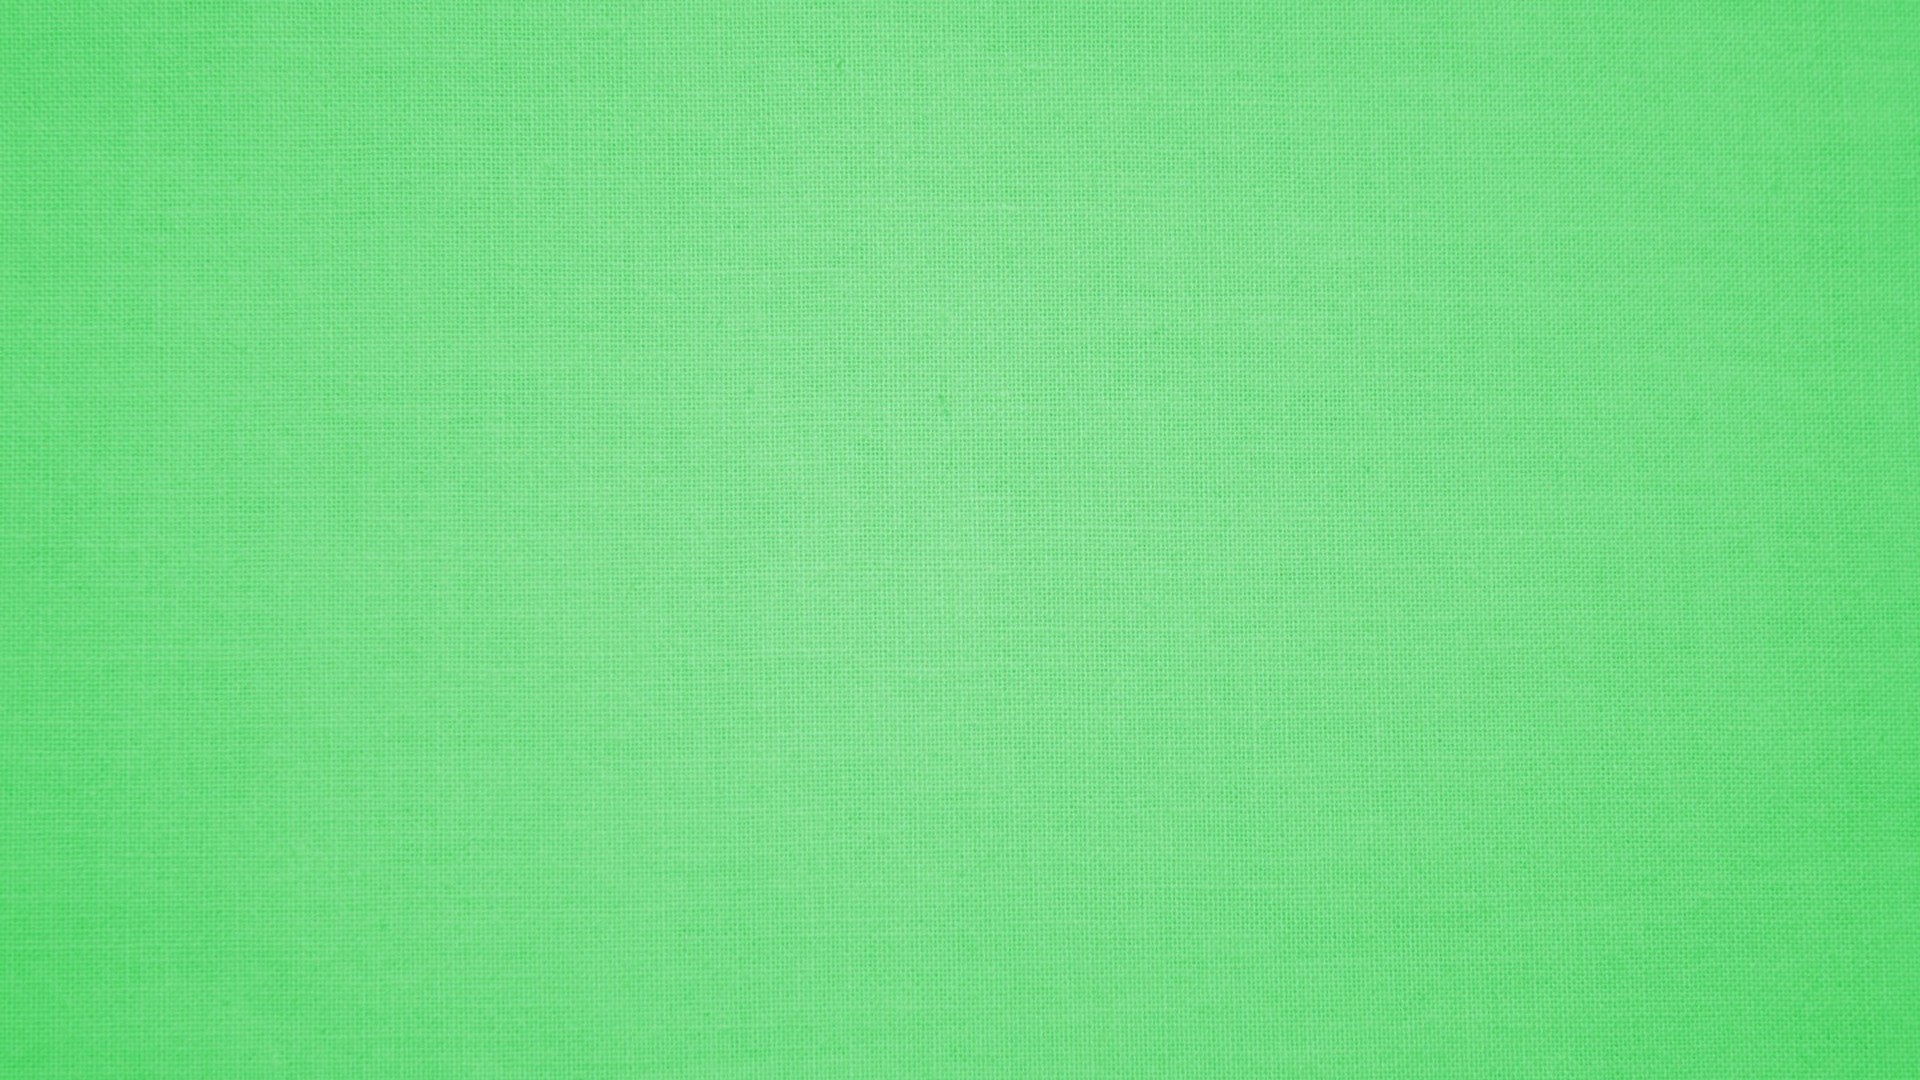 Mint Green Desktop Backgrounds HD with image resolution 1920x1080 pixel. You can use this wallpaper as background for your desktop Computer Screensavers, Android or iPhone smartphones